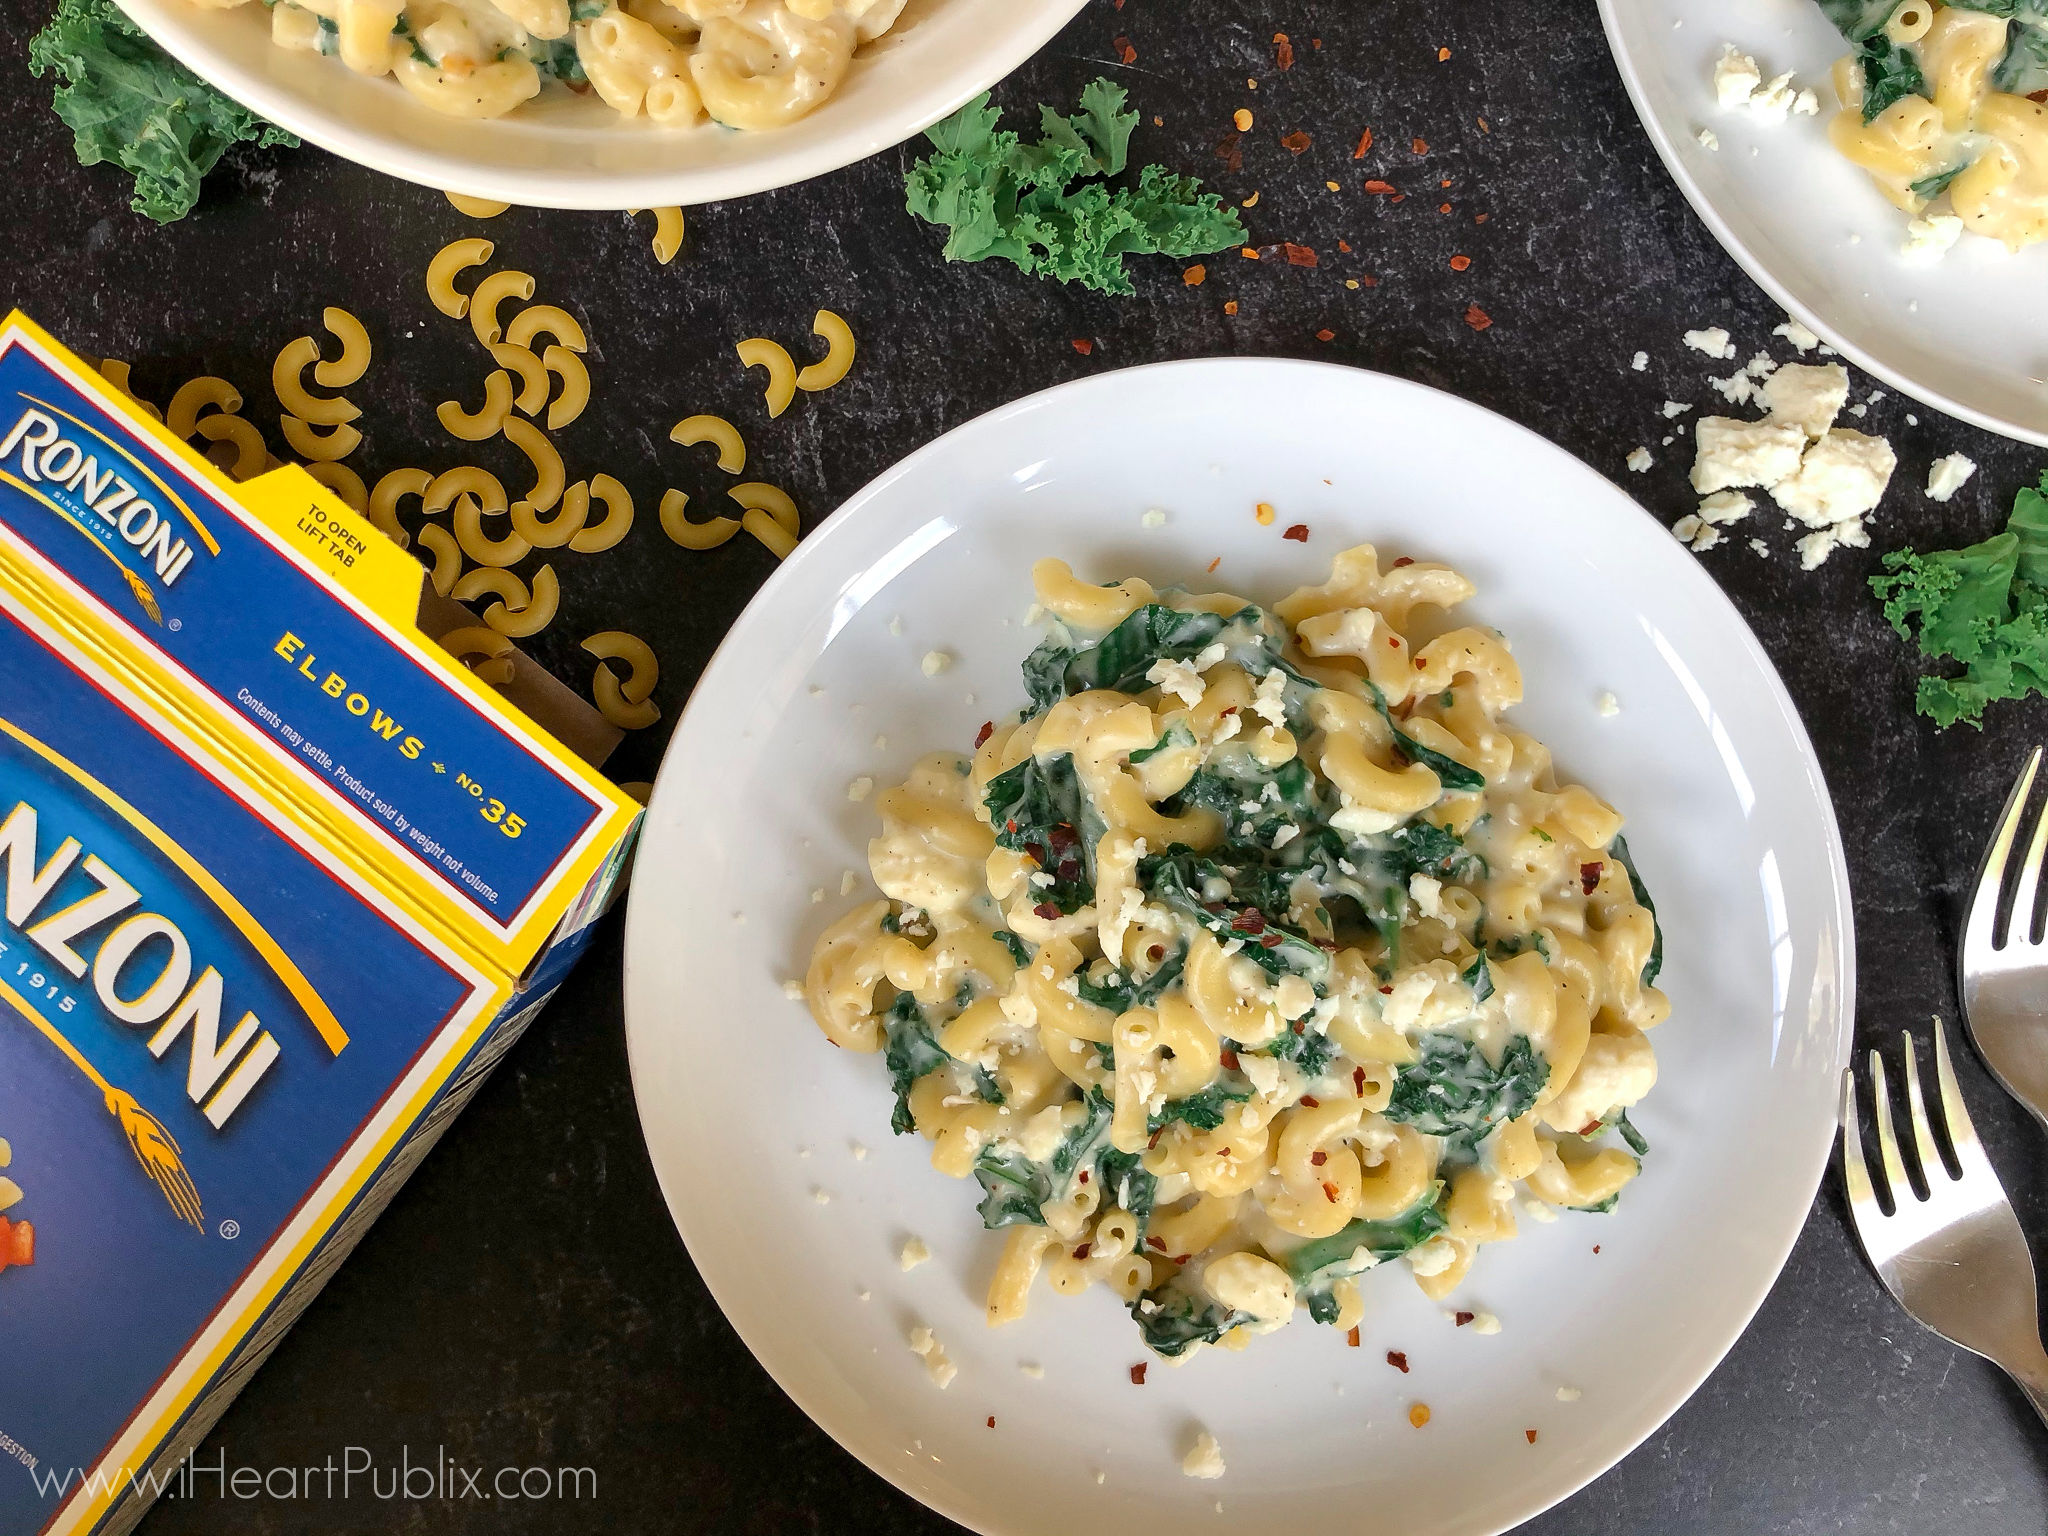 Ronzoni Pasta Is BOGO At Publix - Great Time To Make This Lemon and Rosemary Mac and Cheese on I Heart Publix 3